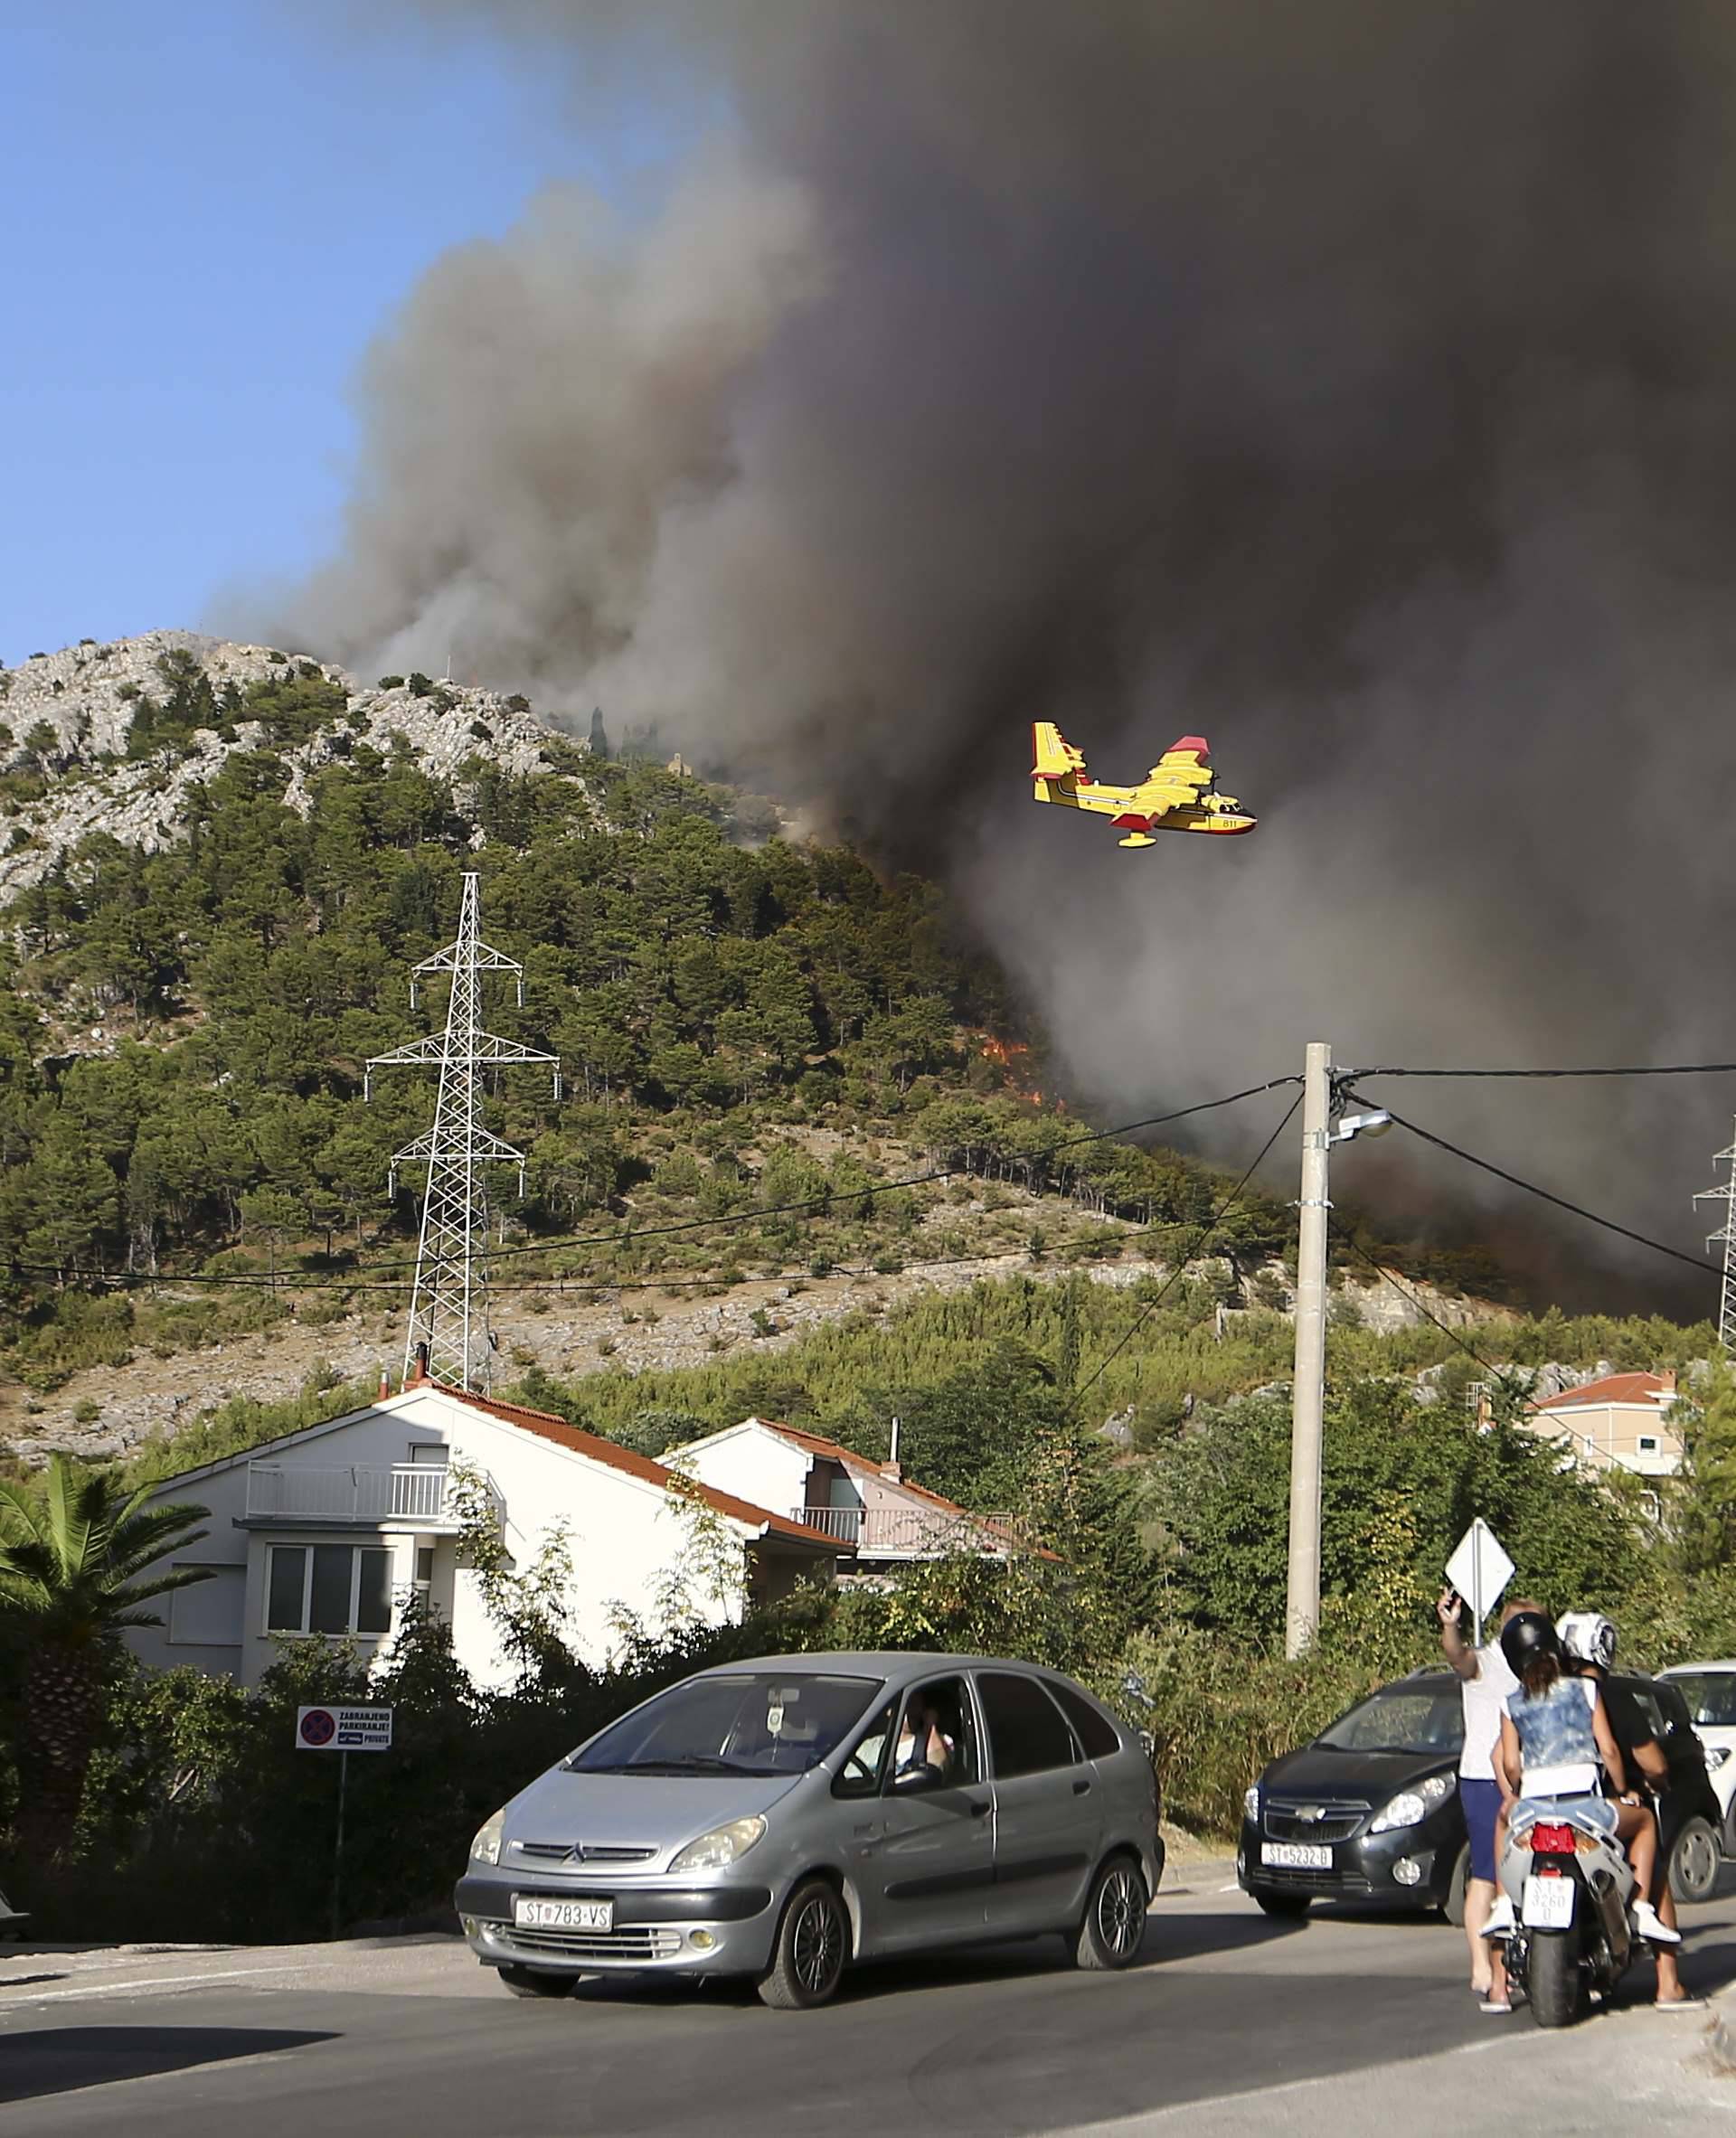 Local residents watch a firefighting plane trying to extinguish a wildfire in the village of Mravinc near Split